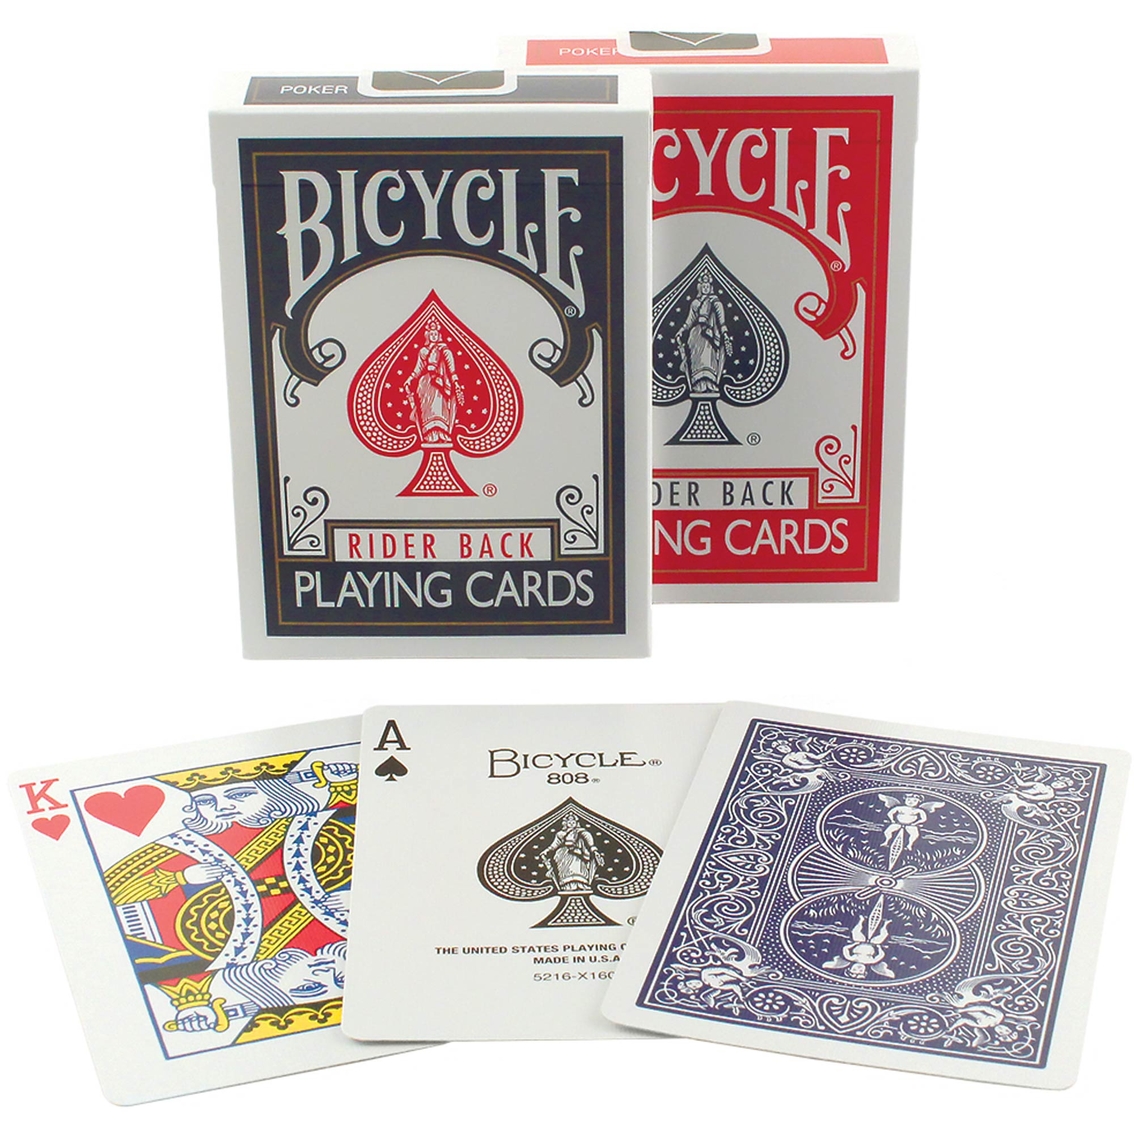 Bicycle Rider Back Playing Cards - Image 2 of 2